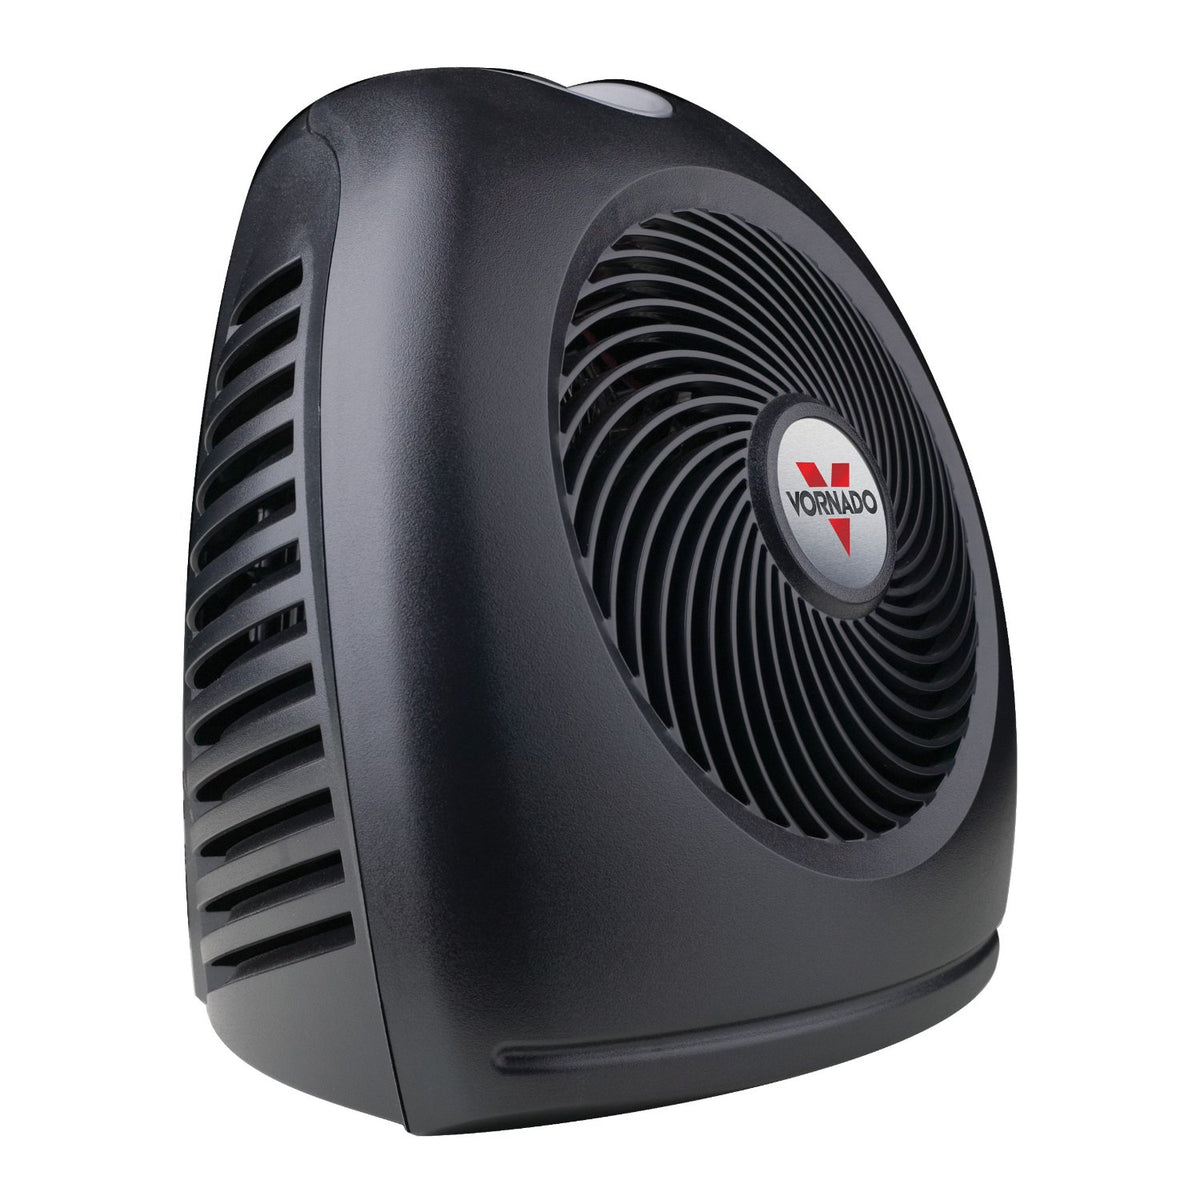 buy electric heaters at cheap rate in bulk. wholesale & retail bulk heater & coolers store.